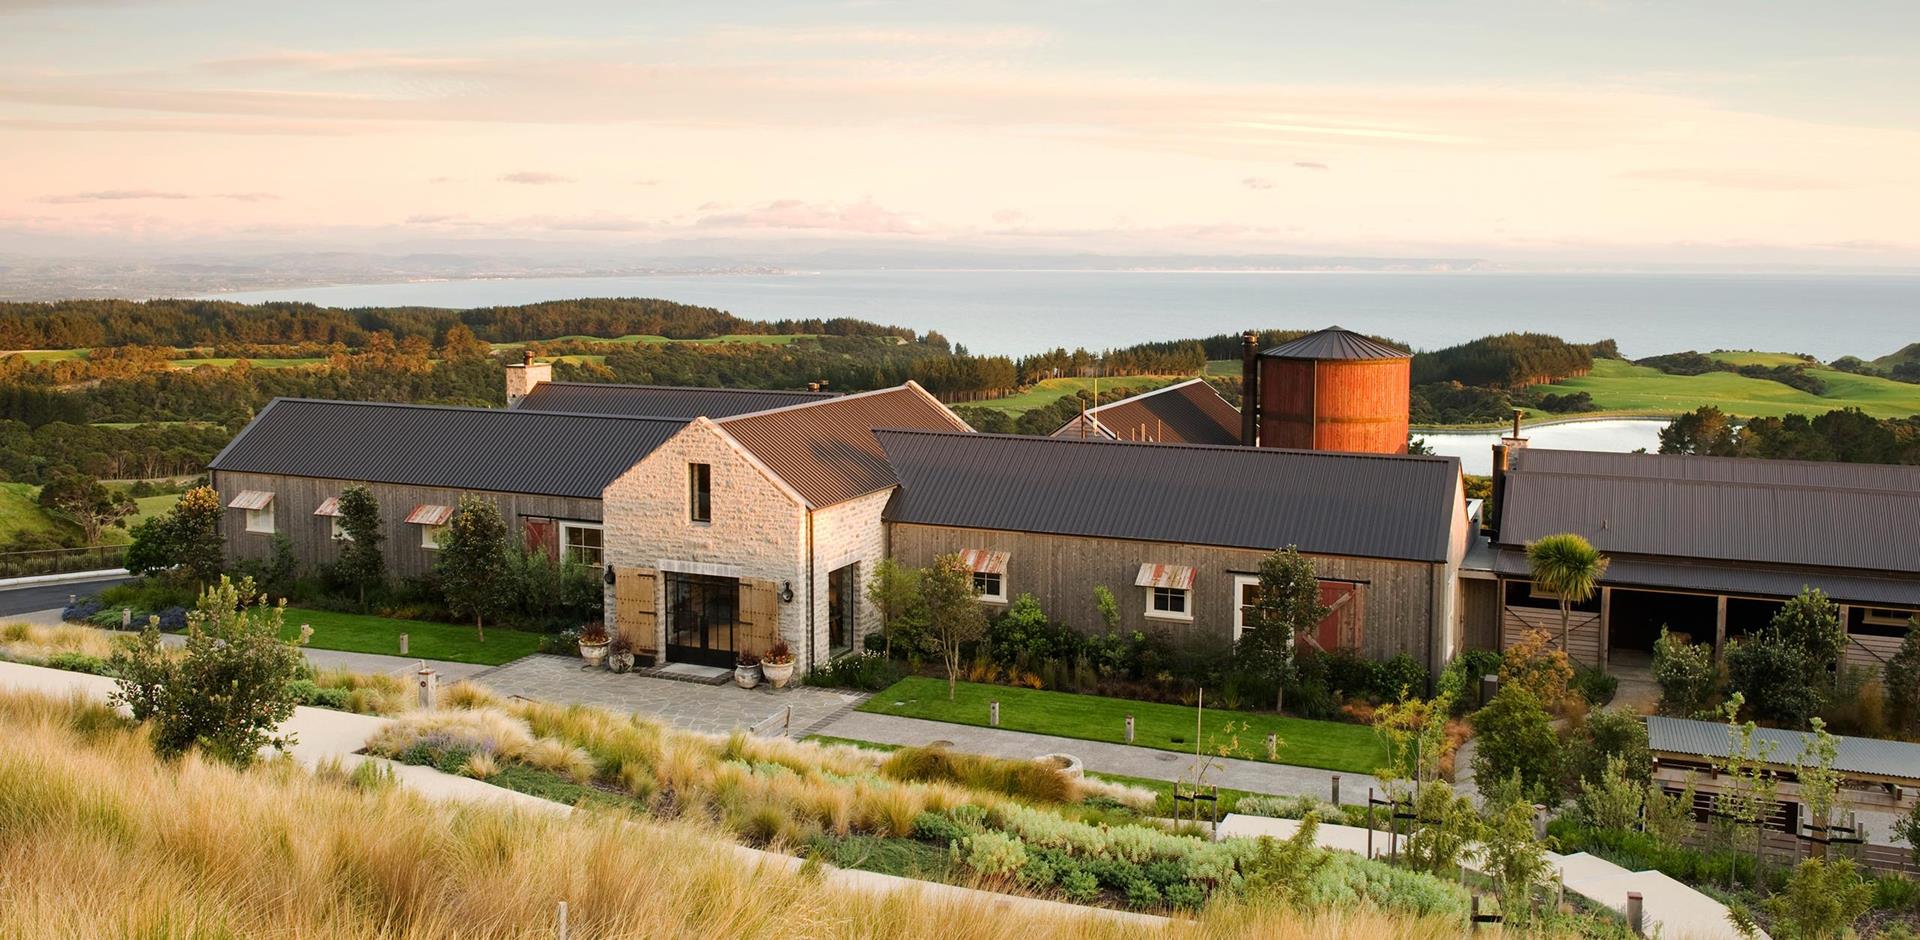 Exterior, The Farm at Cape Kidnappers, New Zealand